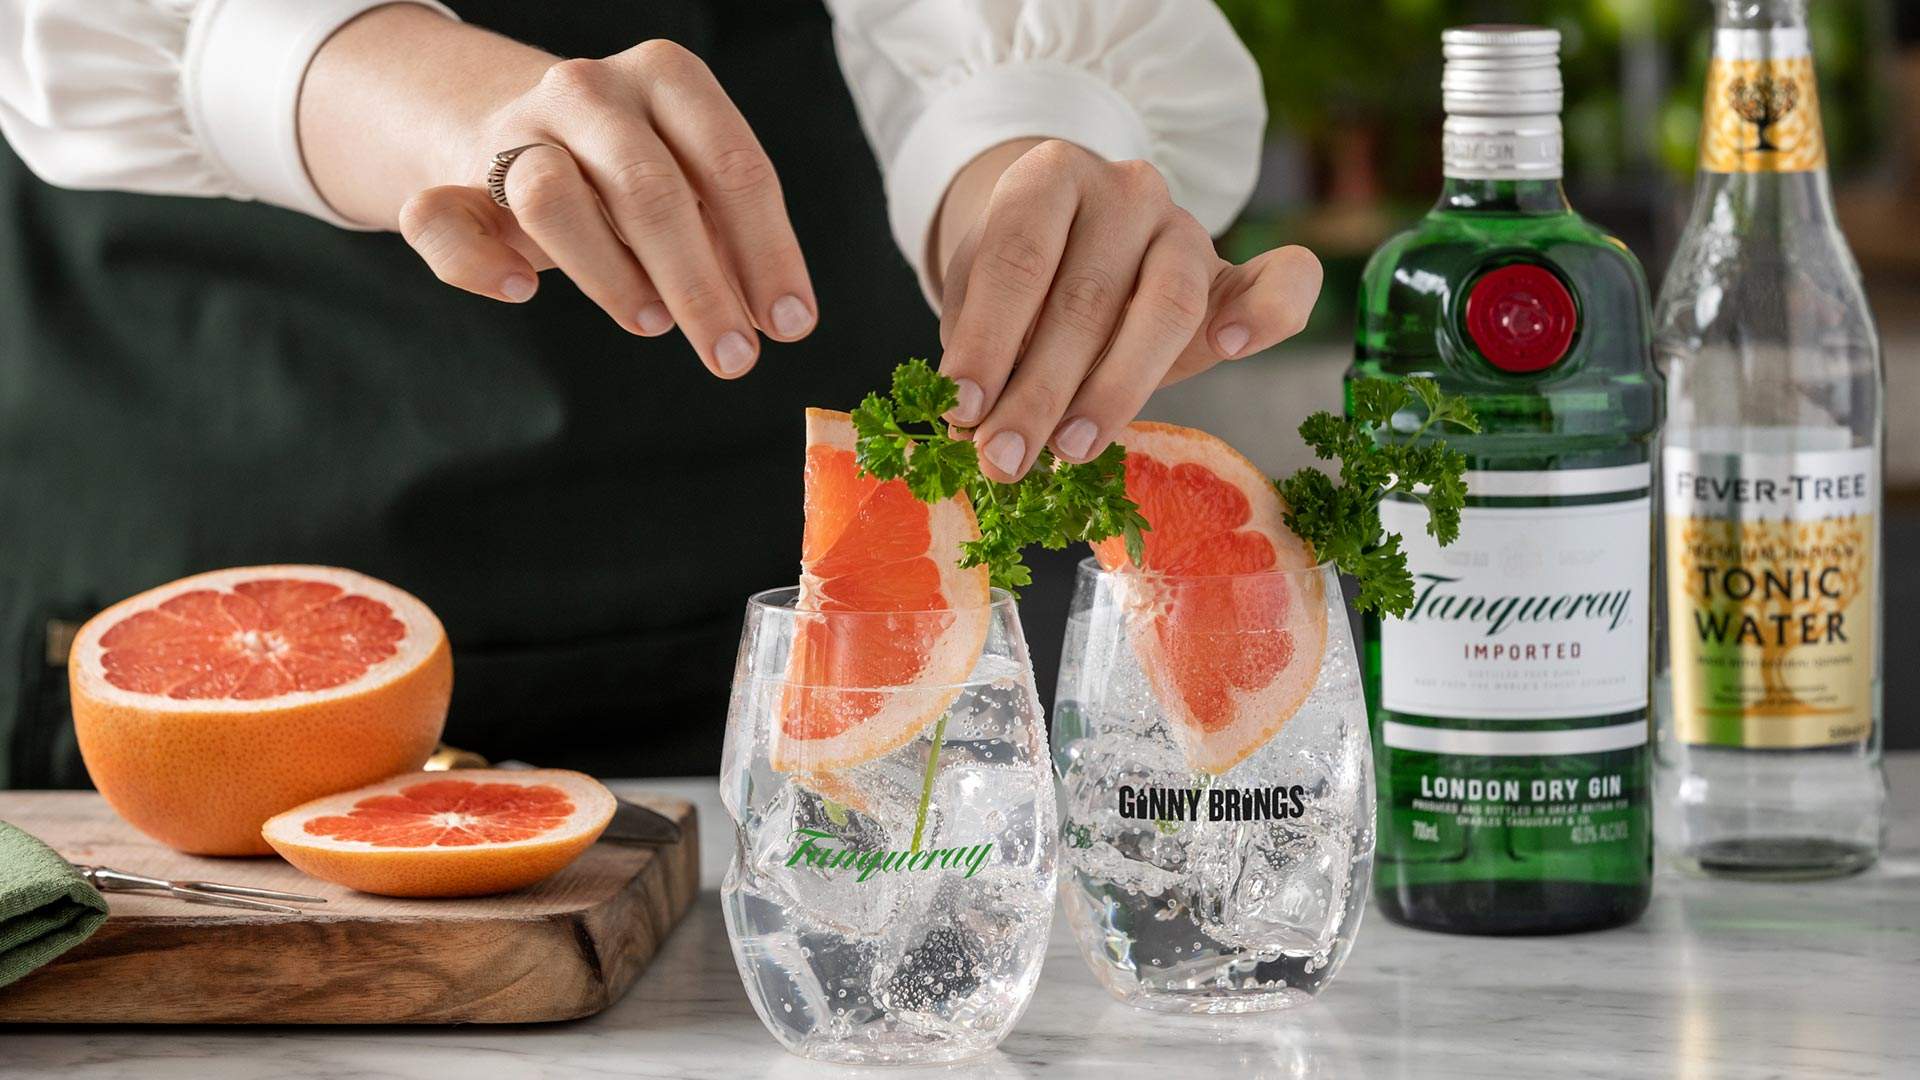 This Gin Delivery Service Will Make Sure Your G&T Supply Is Fully Stocked Right Till New Year's Eve